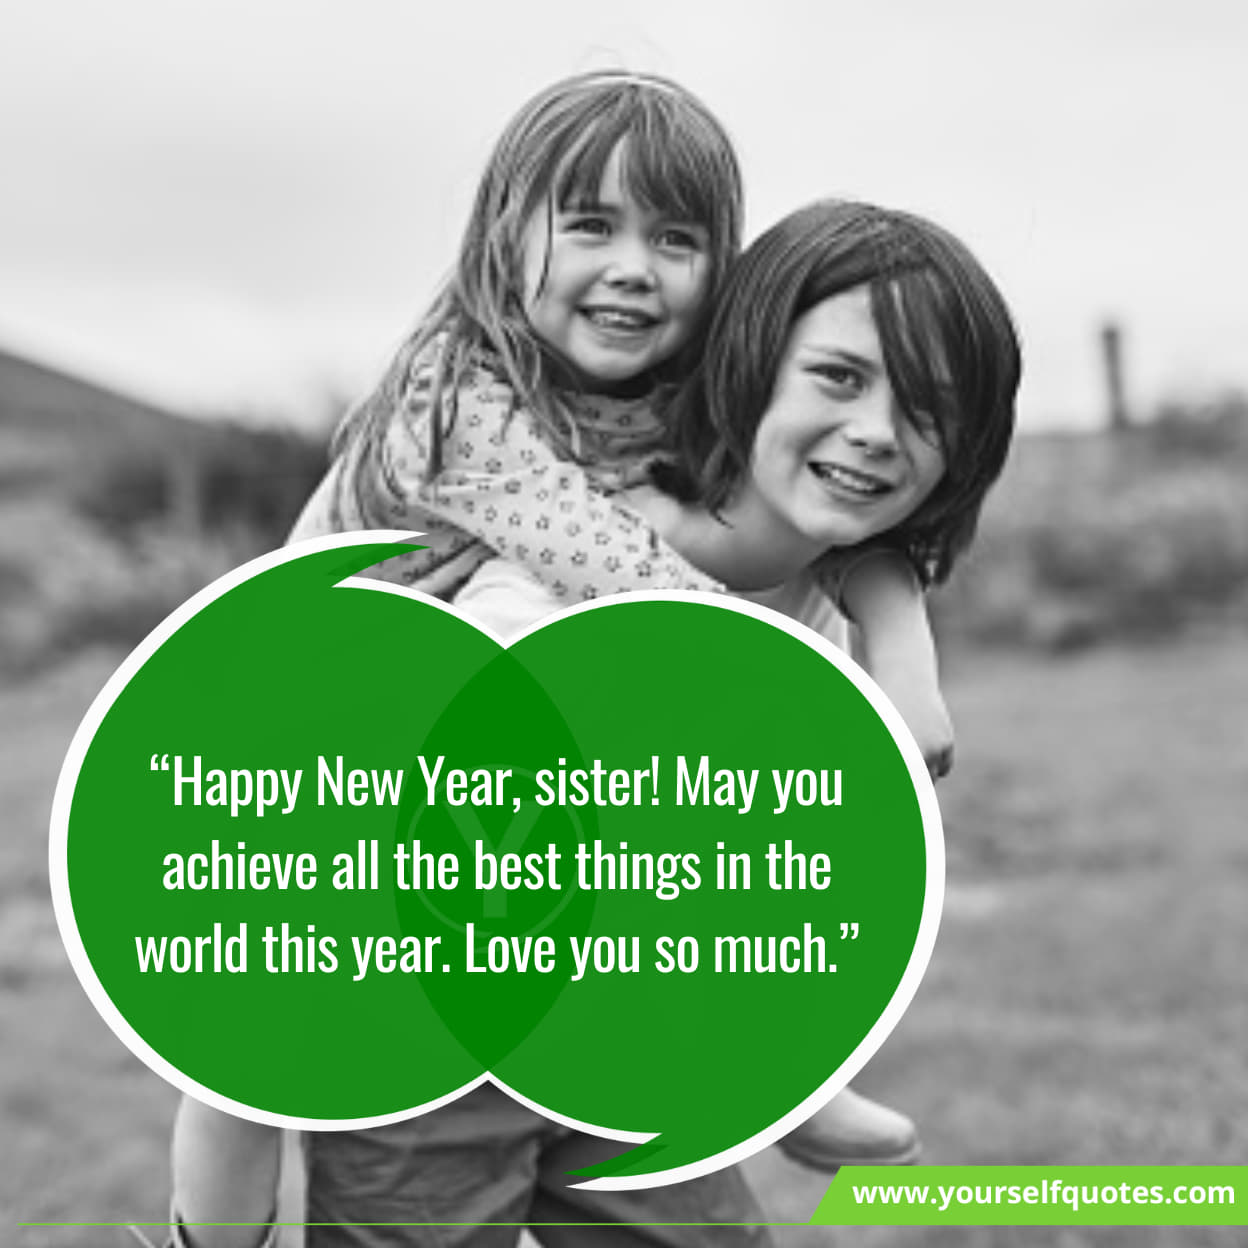 New Year Wishes for Sister